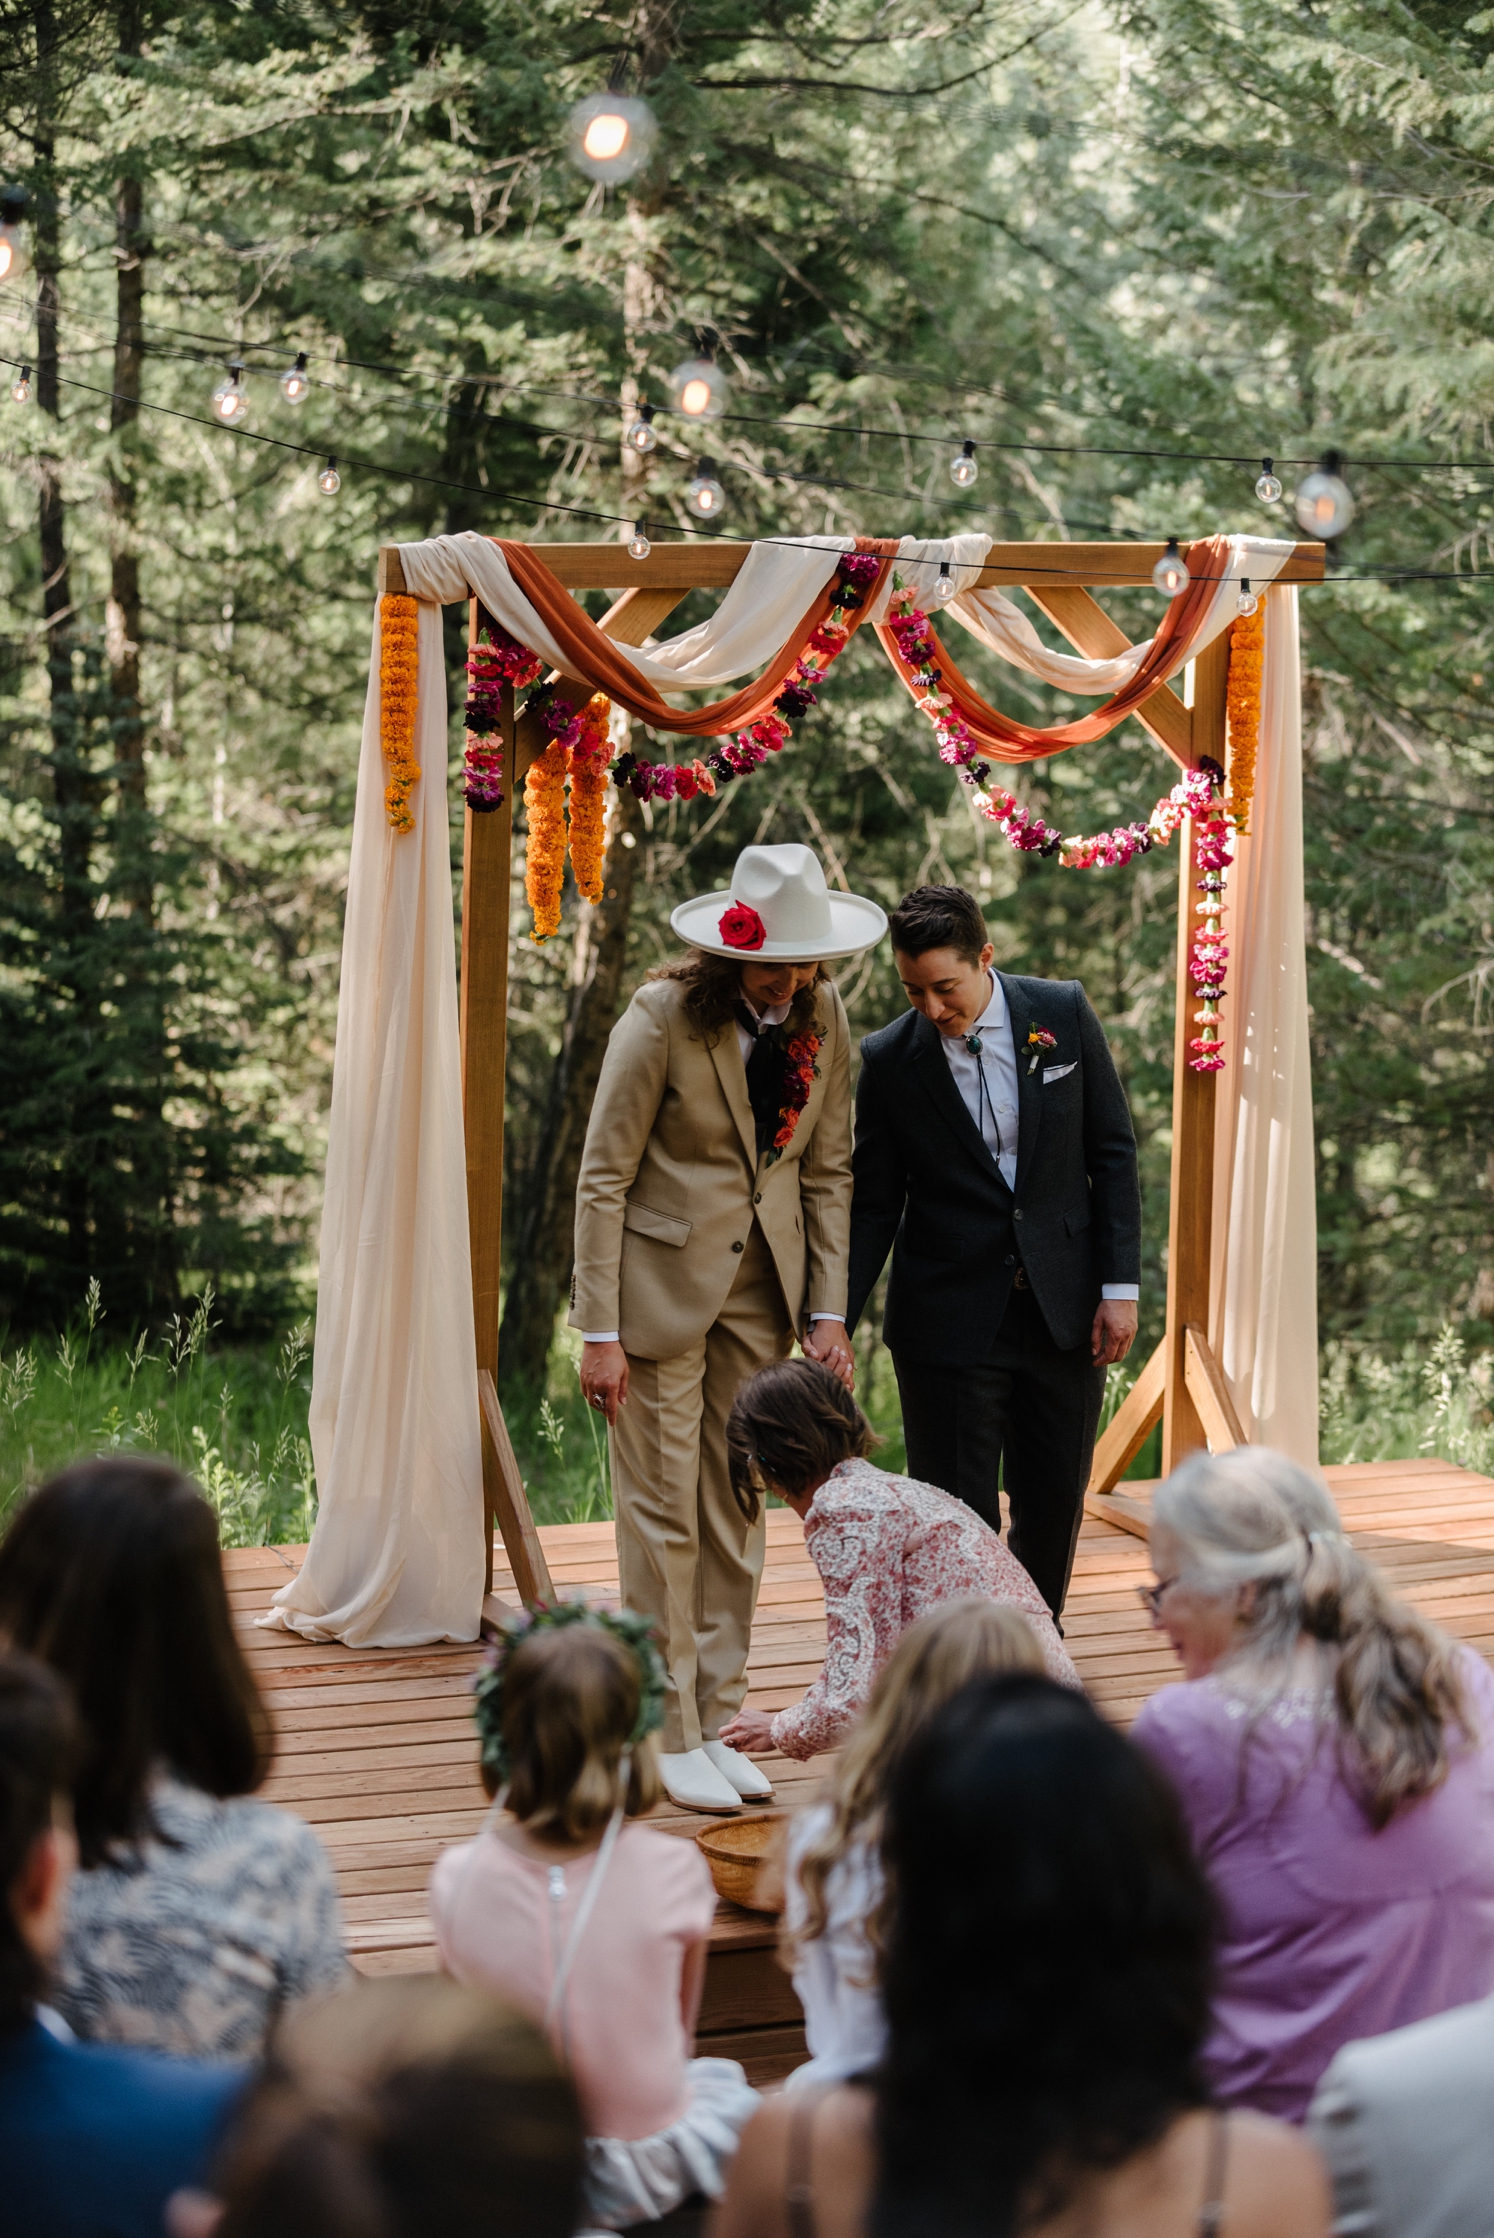 Guest placing offering in basket during LGBTQ wedding at Juniper Mountain House | McArthur Weddings and Events